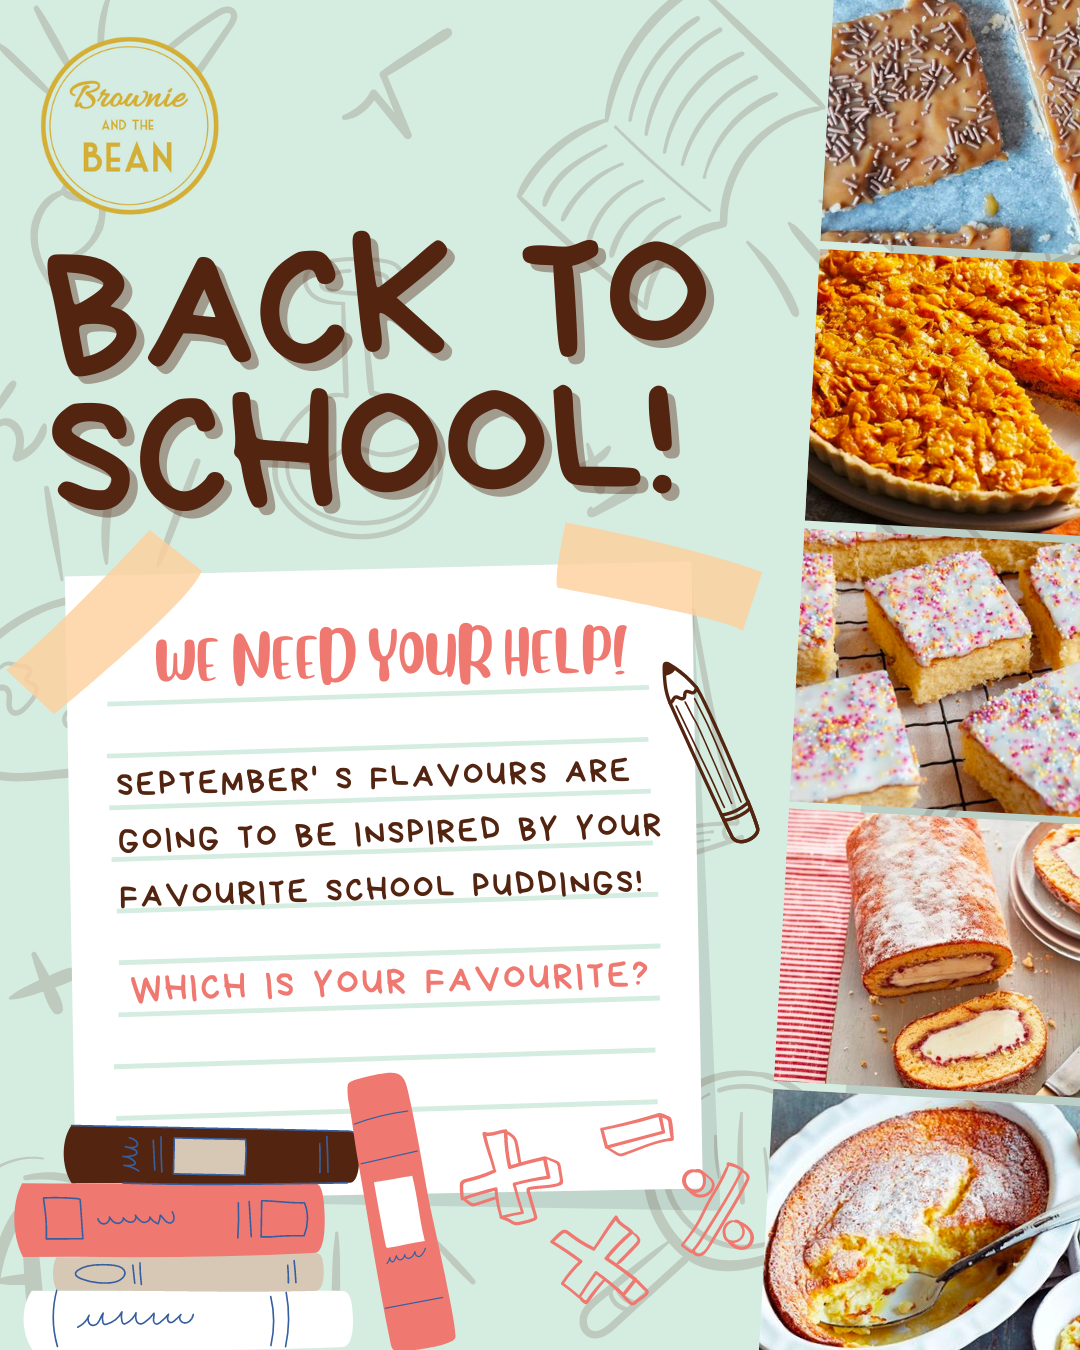 There is a poster with a school theme. The poster reads "Back to School" in large brown font. On the right hand side there are a selection of traditional school puddings. The Brownie and the Bean logo is in the top left. The background to the poster is pale mint green.